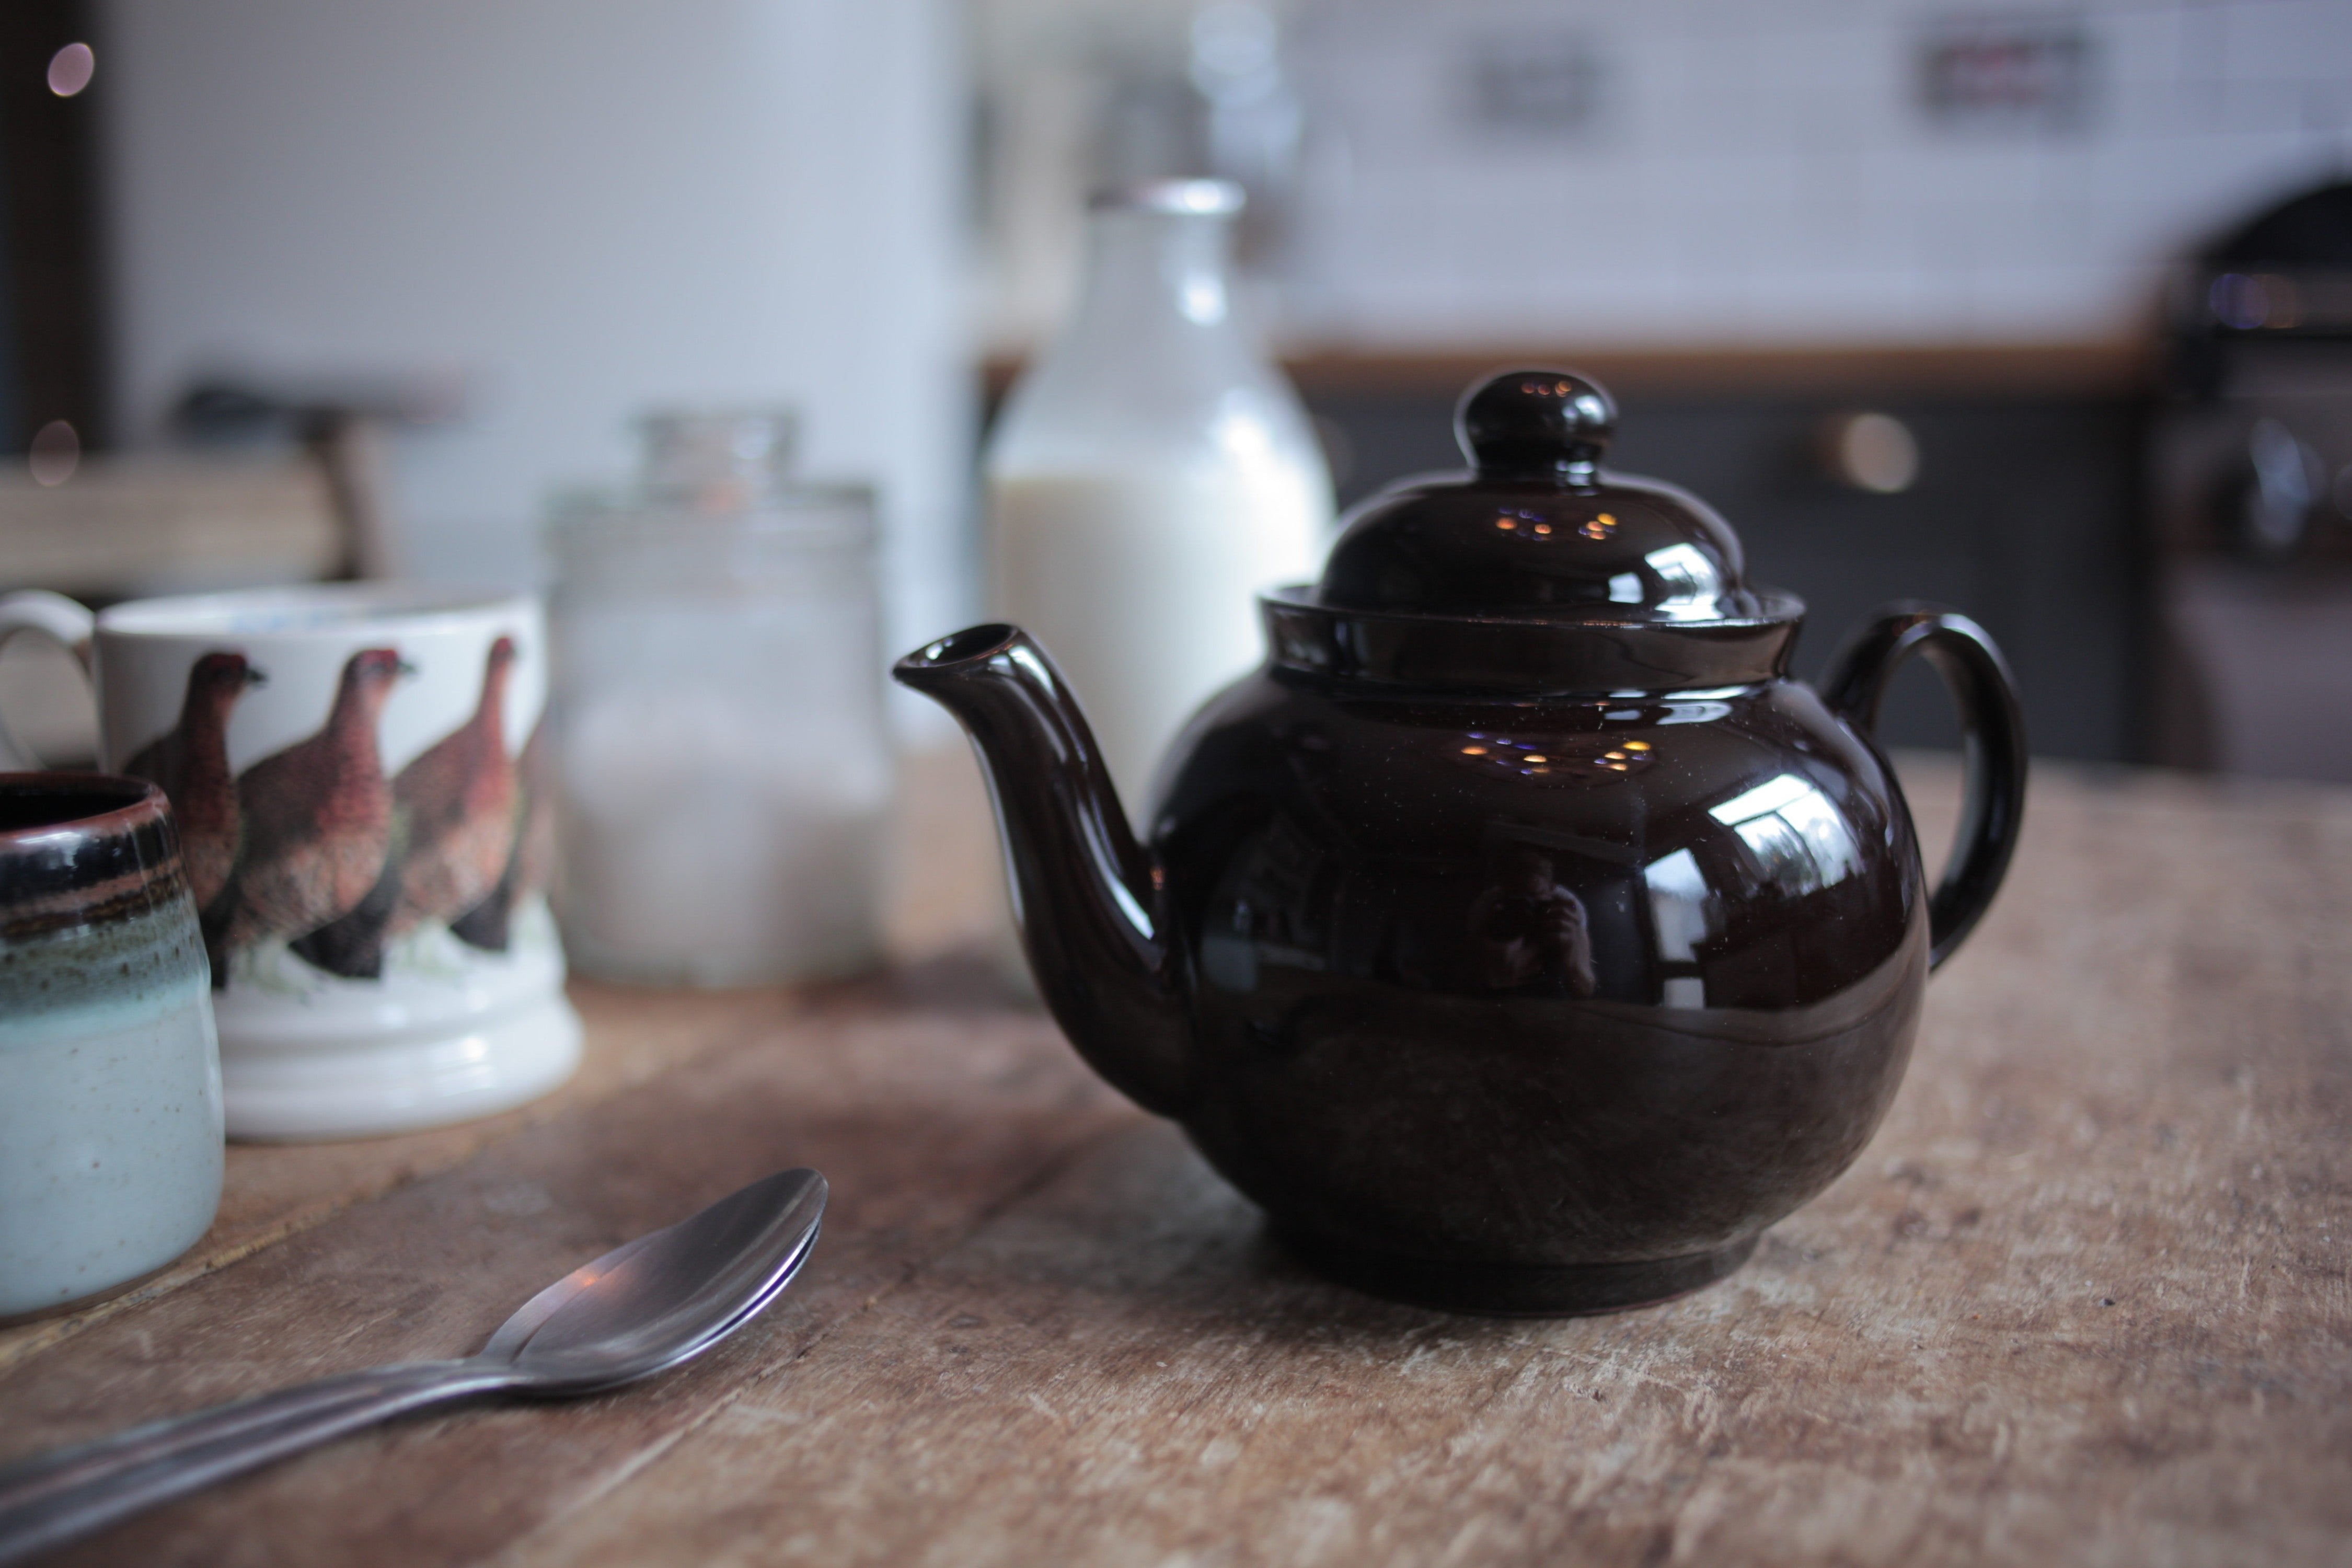 genuine Brown Betty teapot handmade in Stoke-on-Trent, England by Cauldon pottery